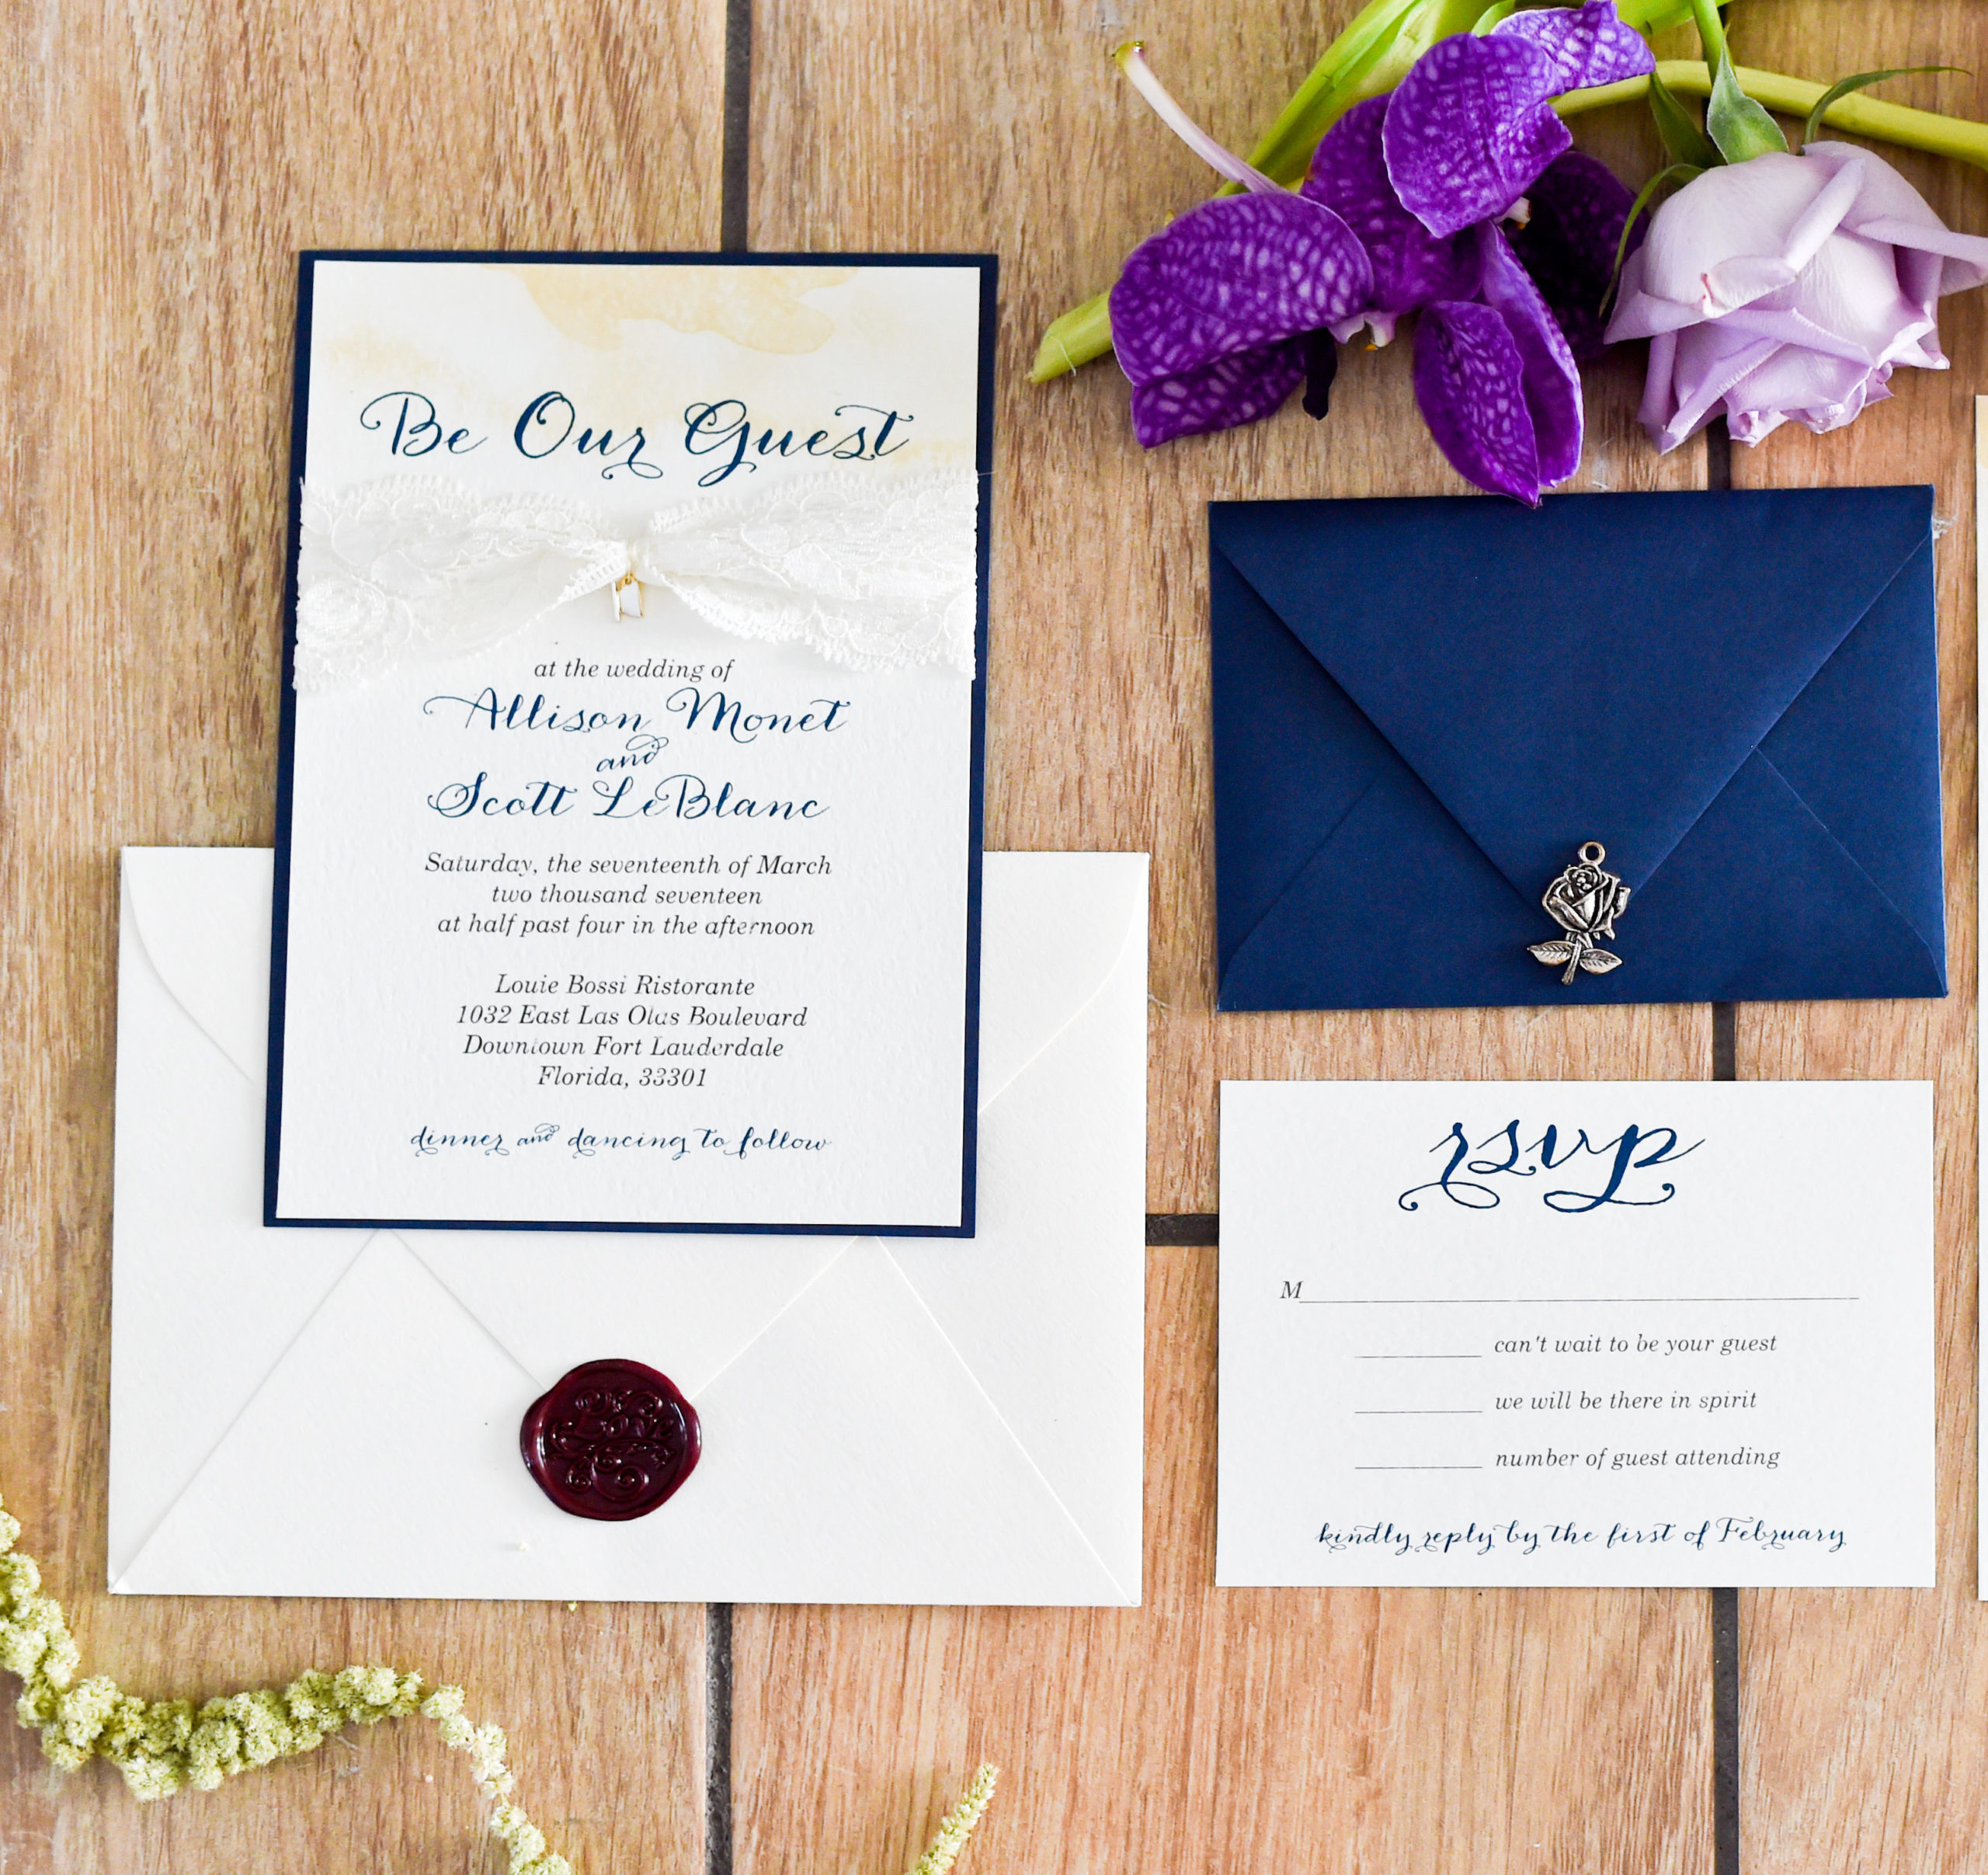 Need Disney wedding ideas for your wedding invitations? The perfect navy and script Beauty and the Beast wedding invitation